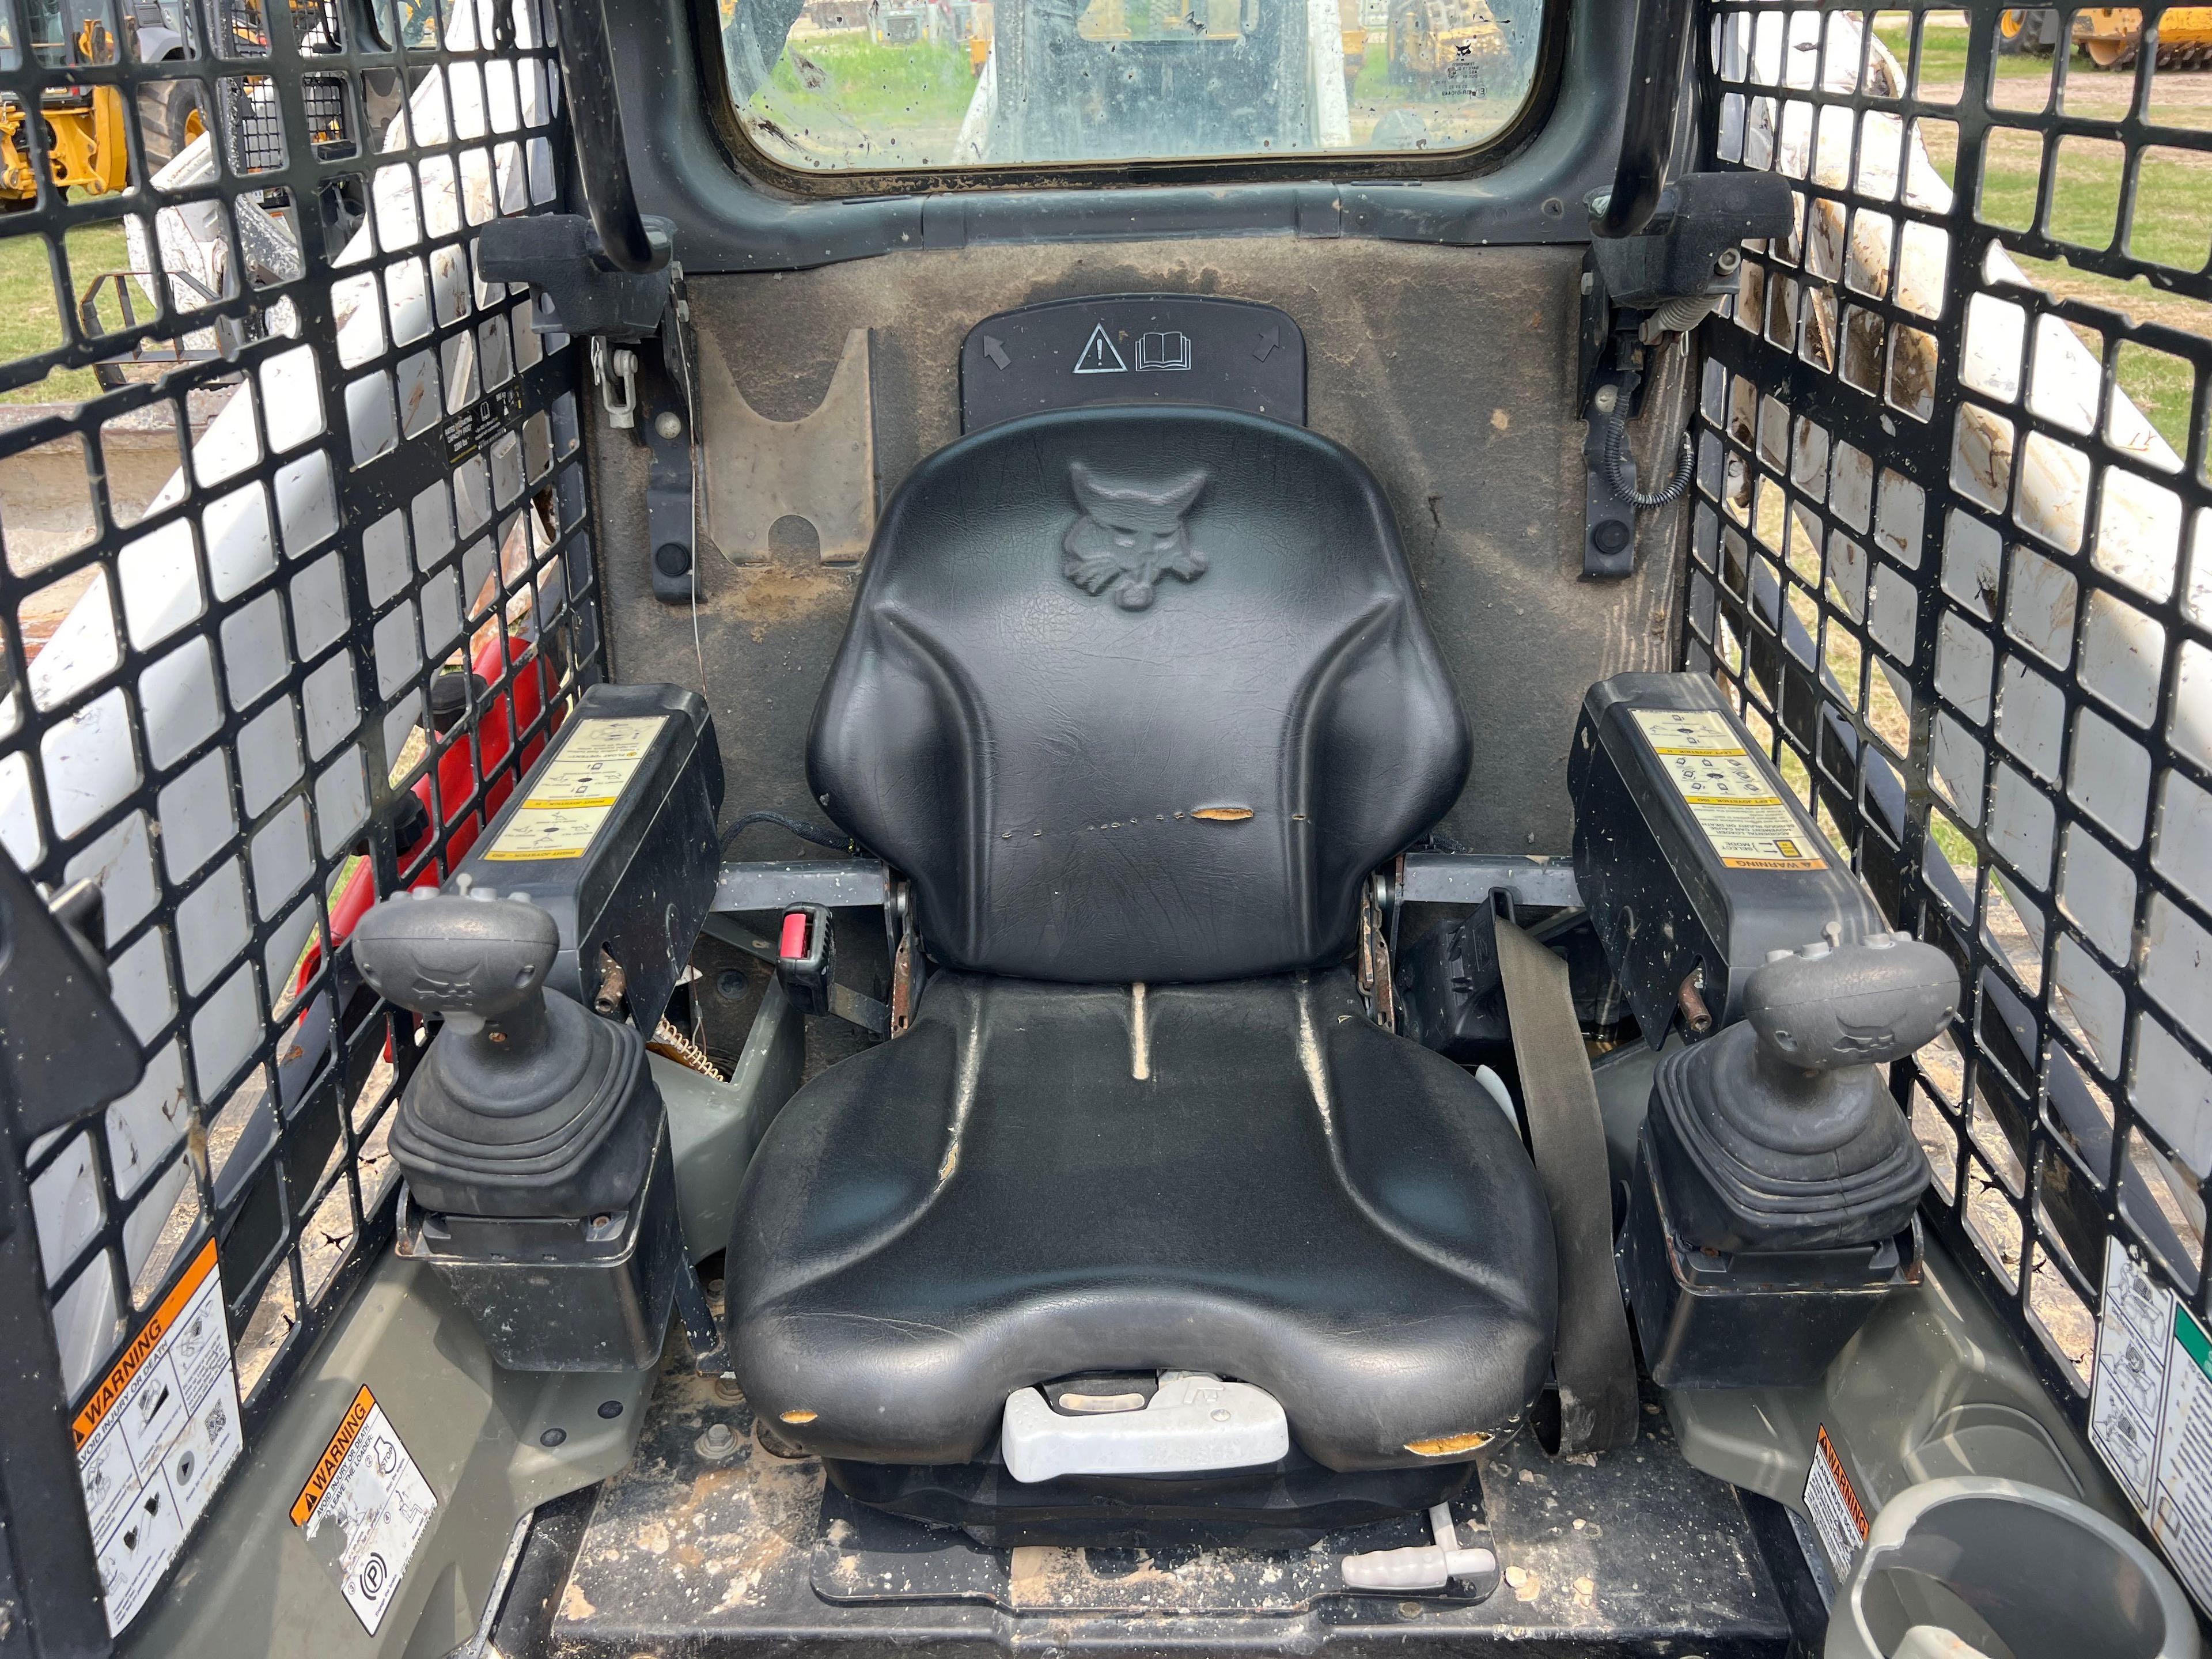 2020 BOBCAT T595 RUBBER TRACKED SKID STEER SN:B3NK36715 powered by diesel engine, equipped with